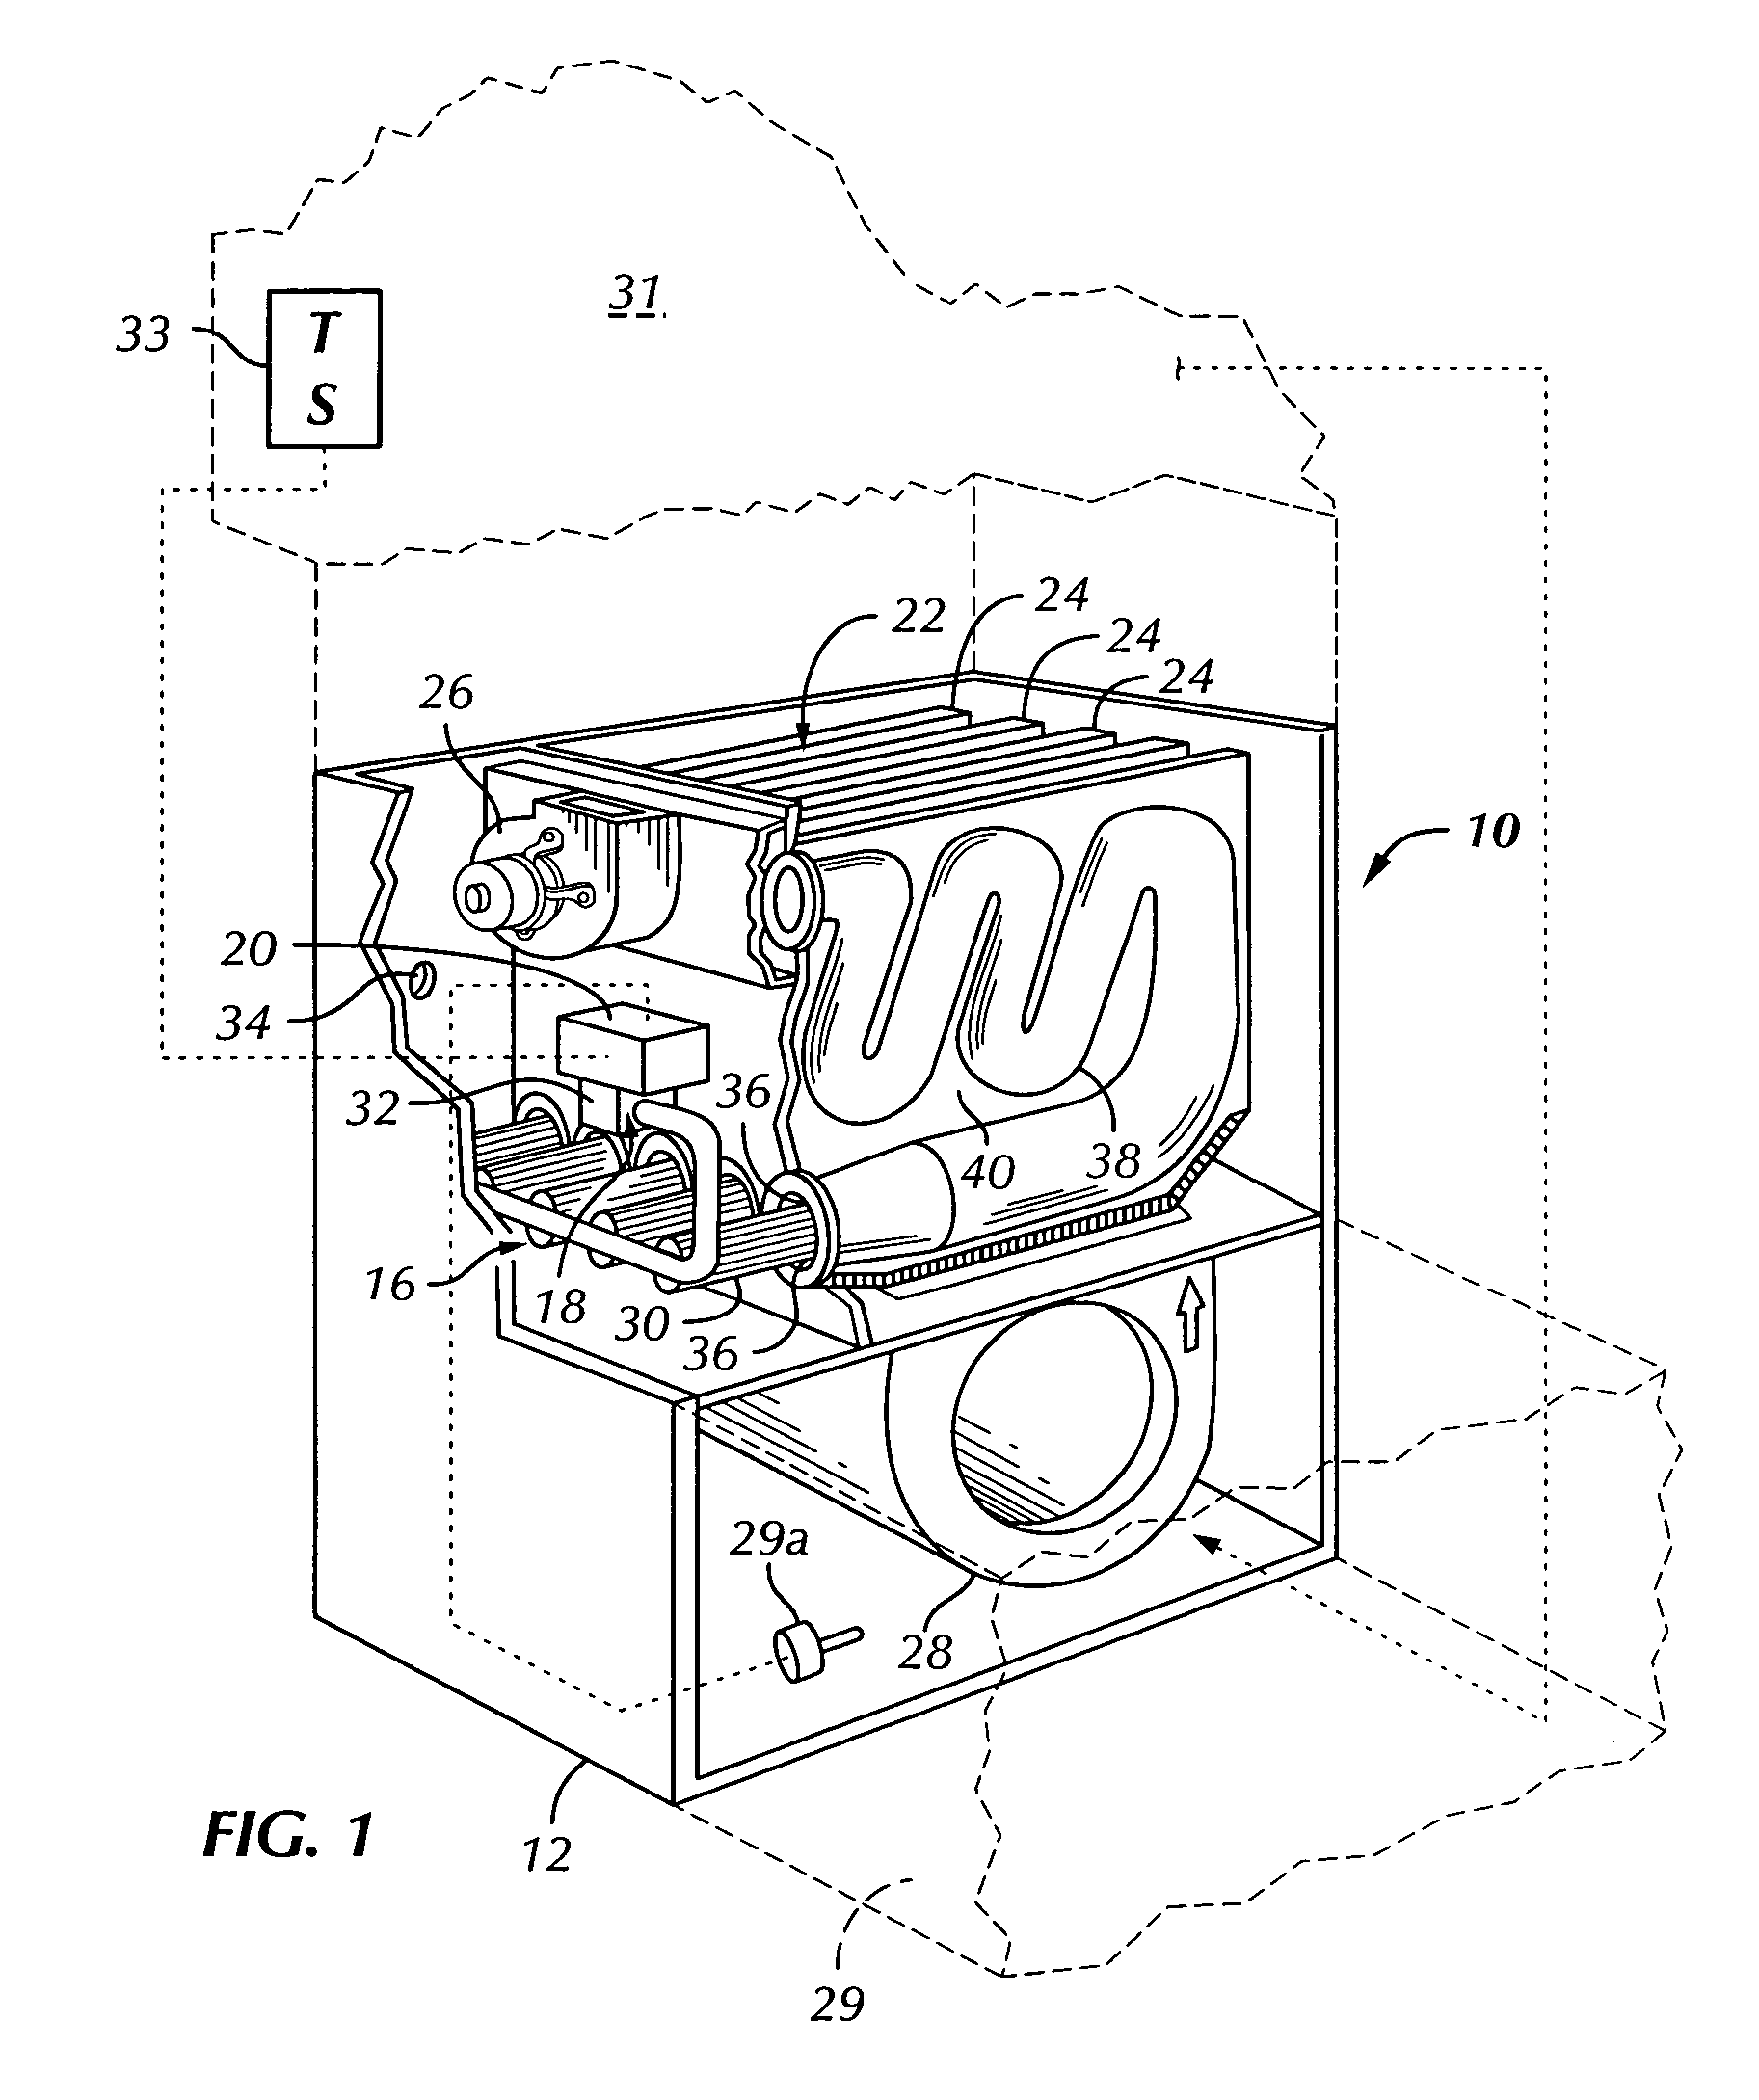 Multistage warm air furnace with single stage thermostat and return air sensor and method of operating same